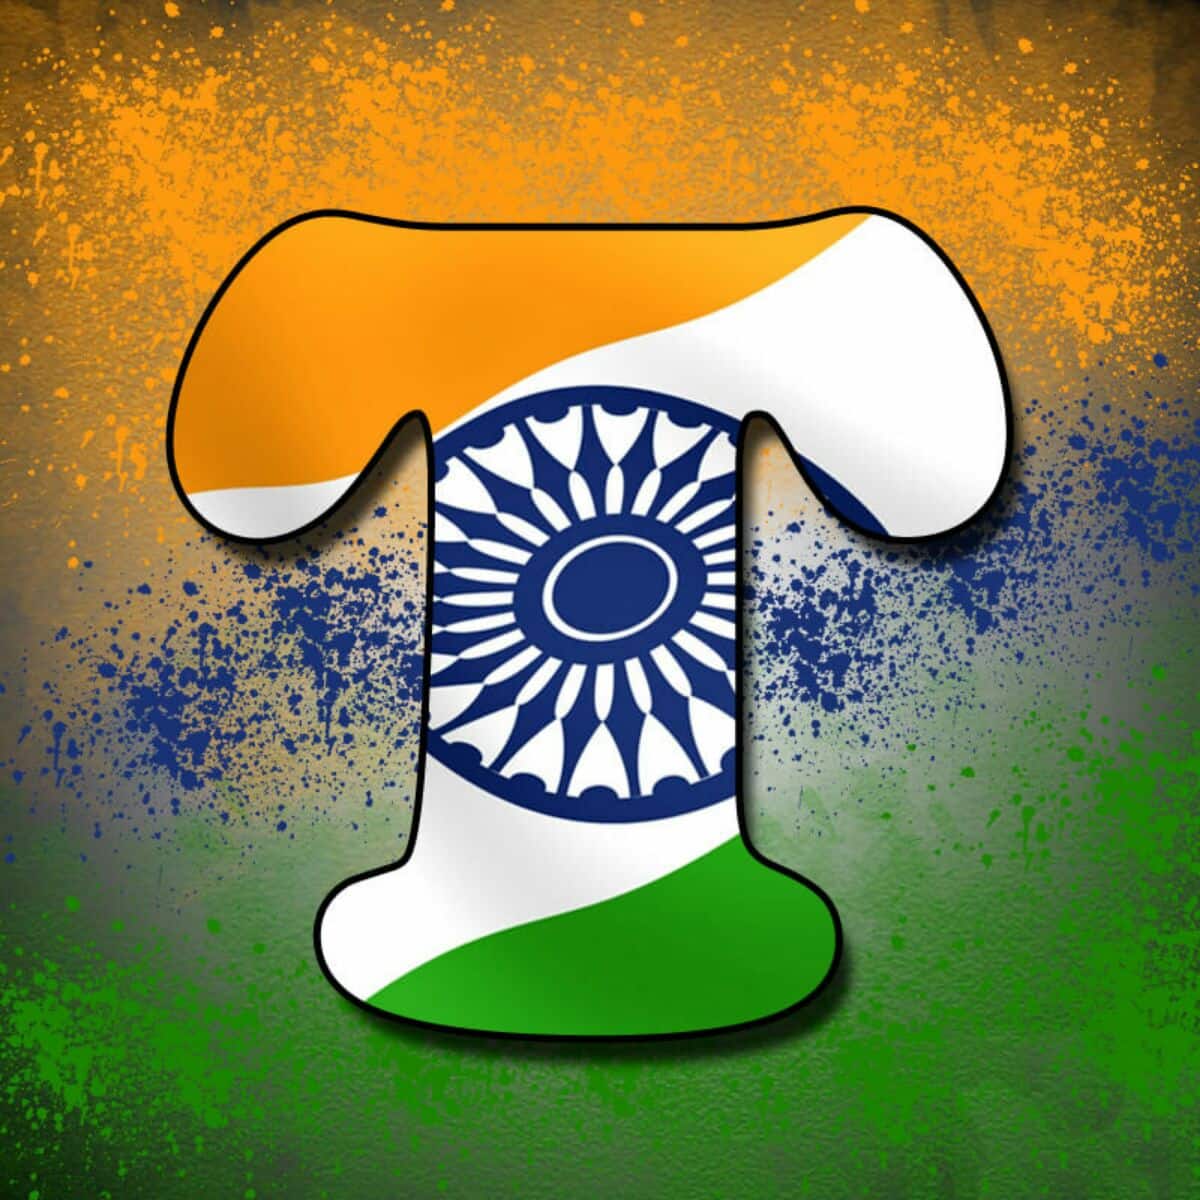 Tiranga Pluspng Provides You With Hq Jhandapng, Psd, - Indian Flag T Letter - HD Wallpaper 